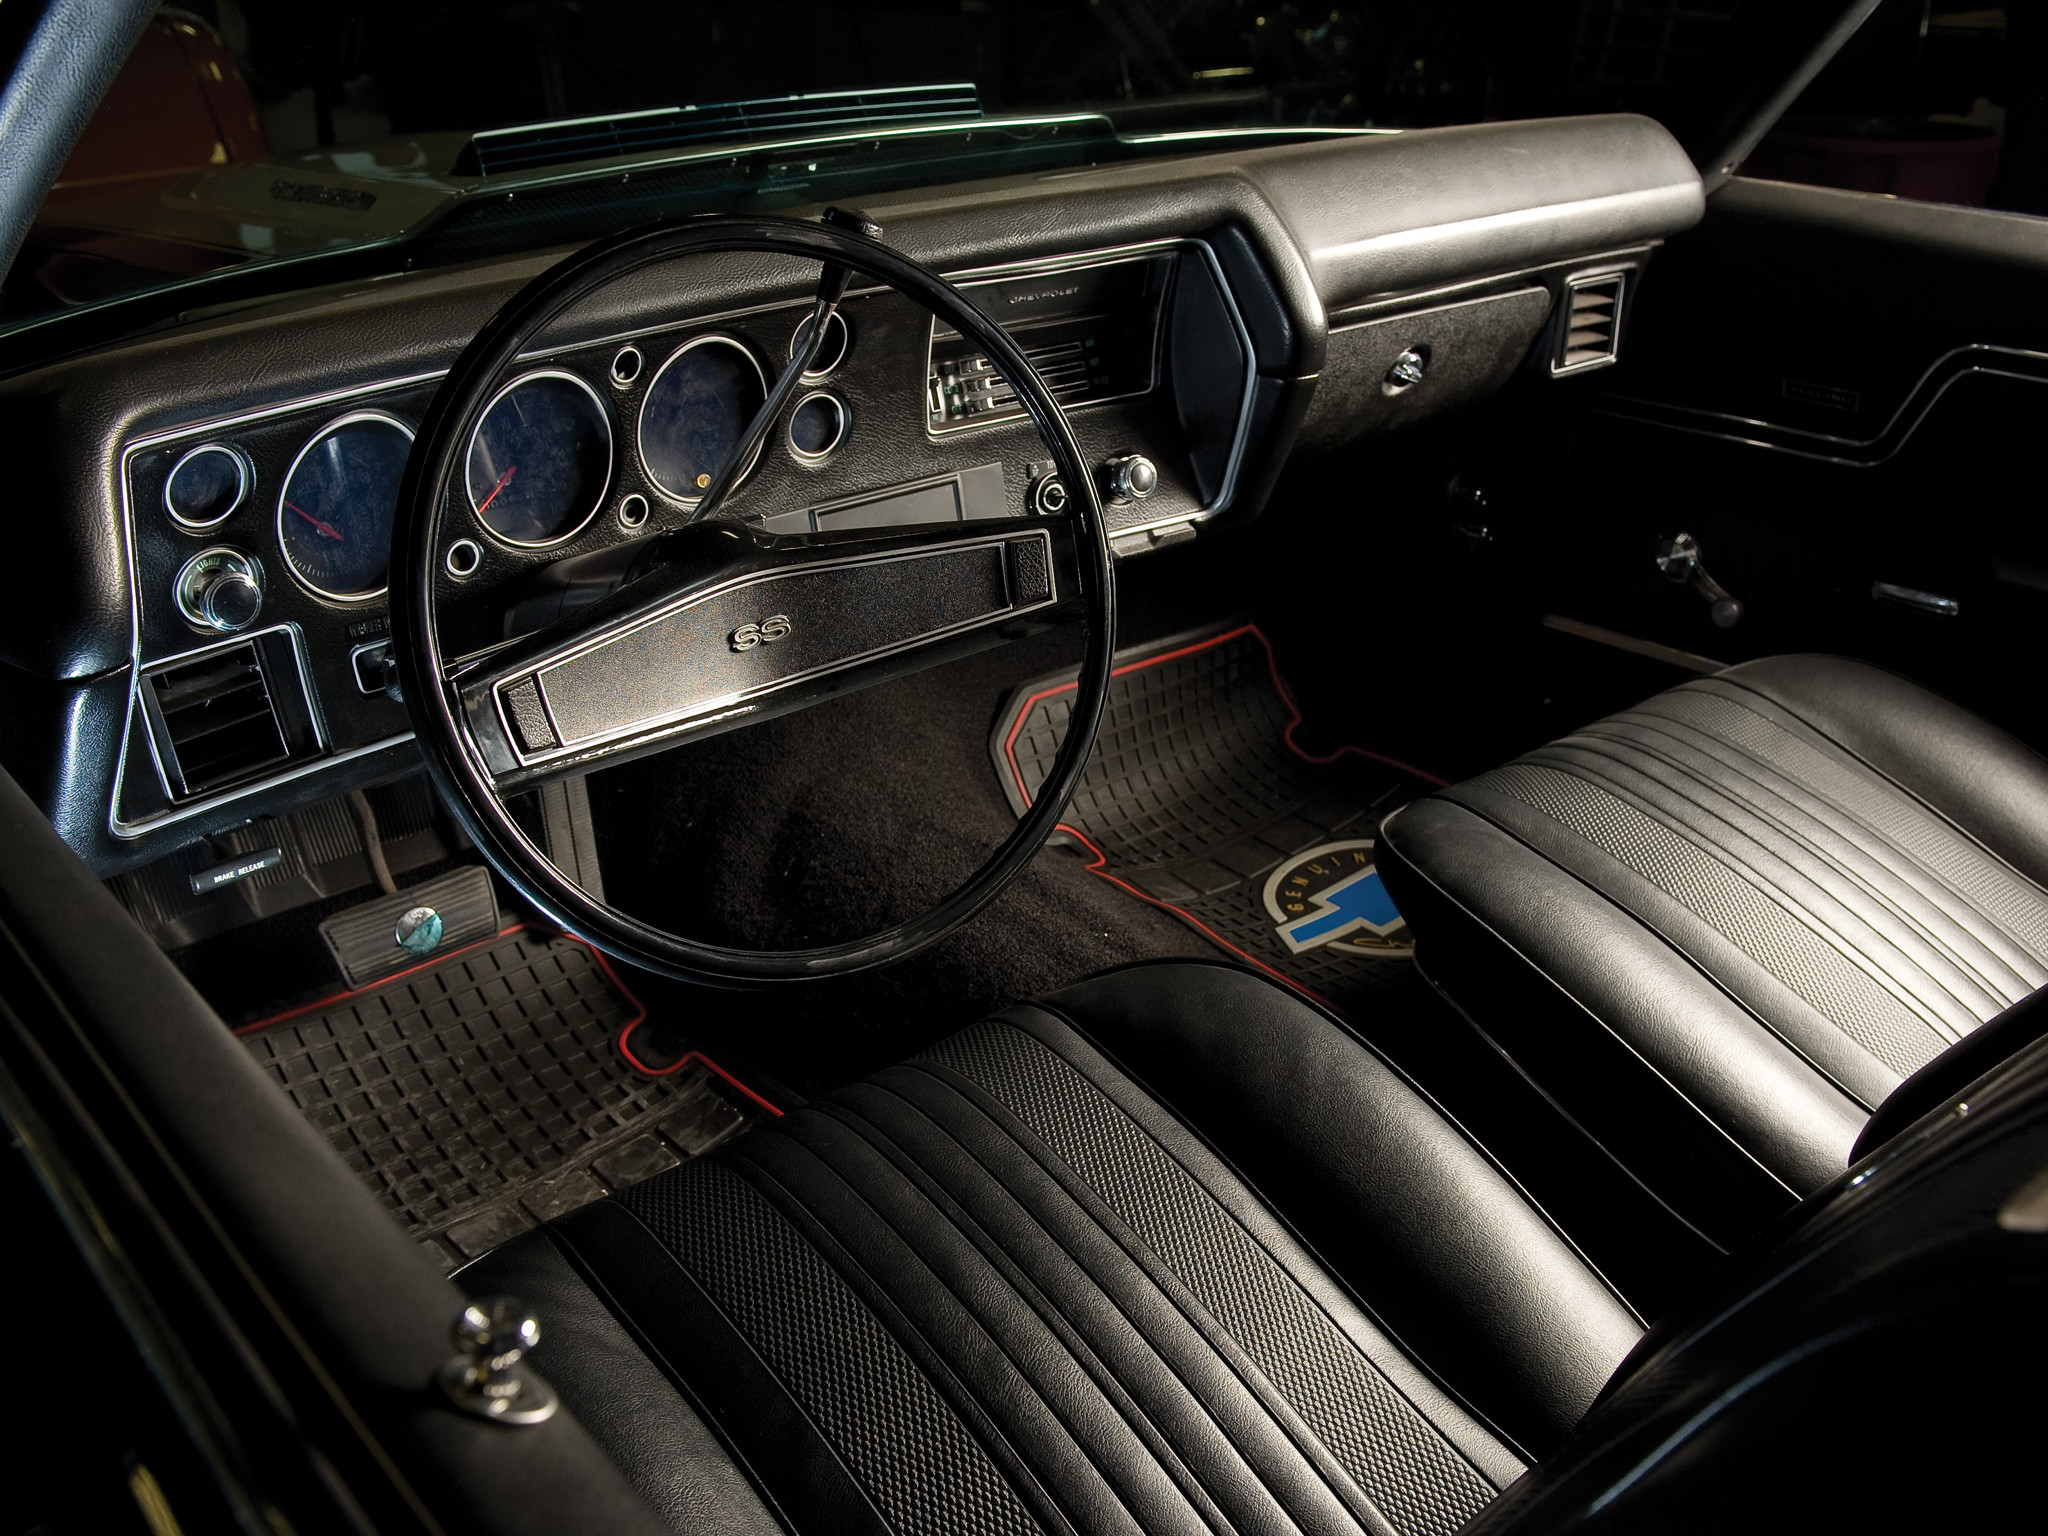 2048x1536 1970 Chevrolet Chevelle S-S 454 LS6 Convertible NHRA Super-Stock drag  racing race hot rod rods muscle classic interior f wallpaper |  |  117857 | ...